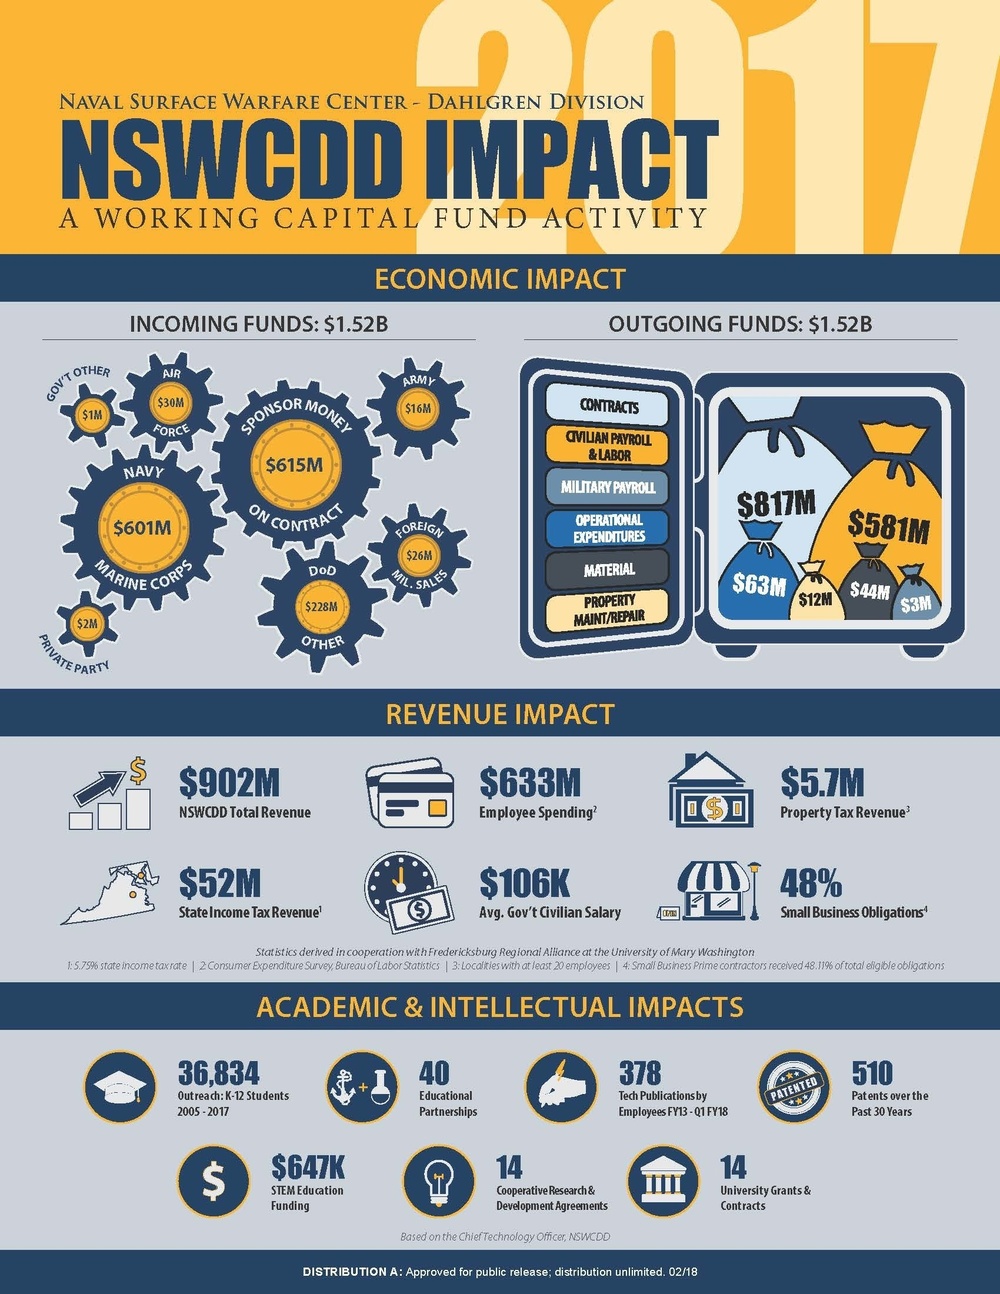 NSWC Dahlgren Division Releases its Economic and Intellectual Impact Findings